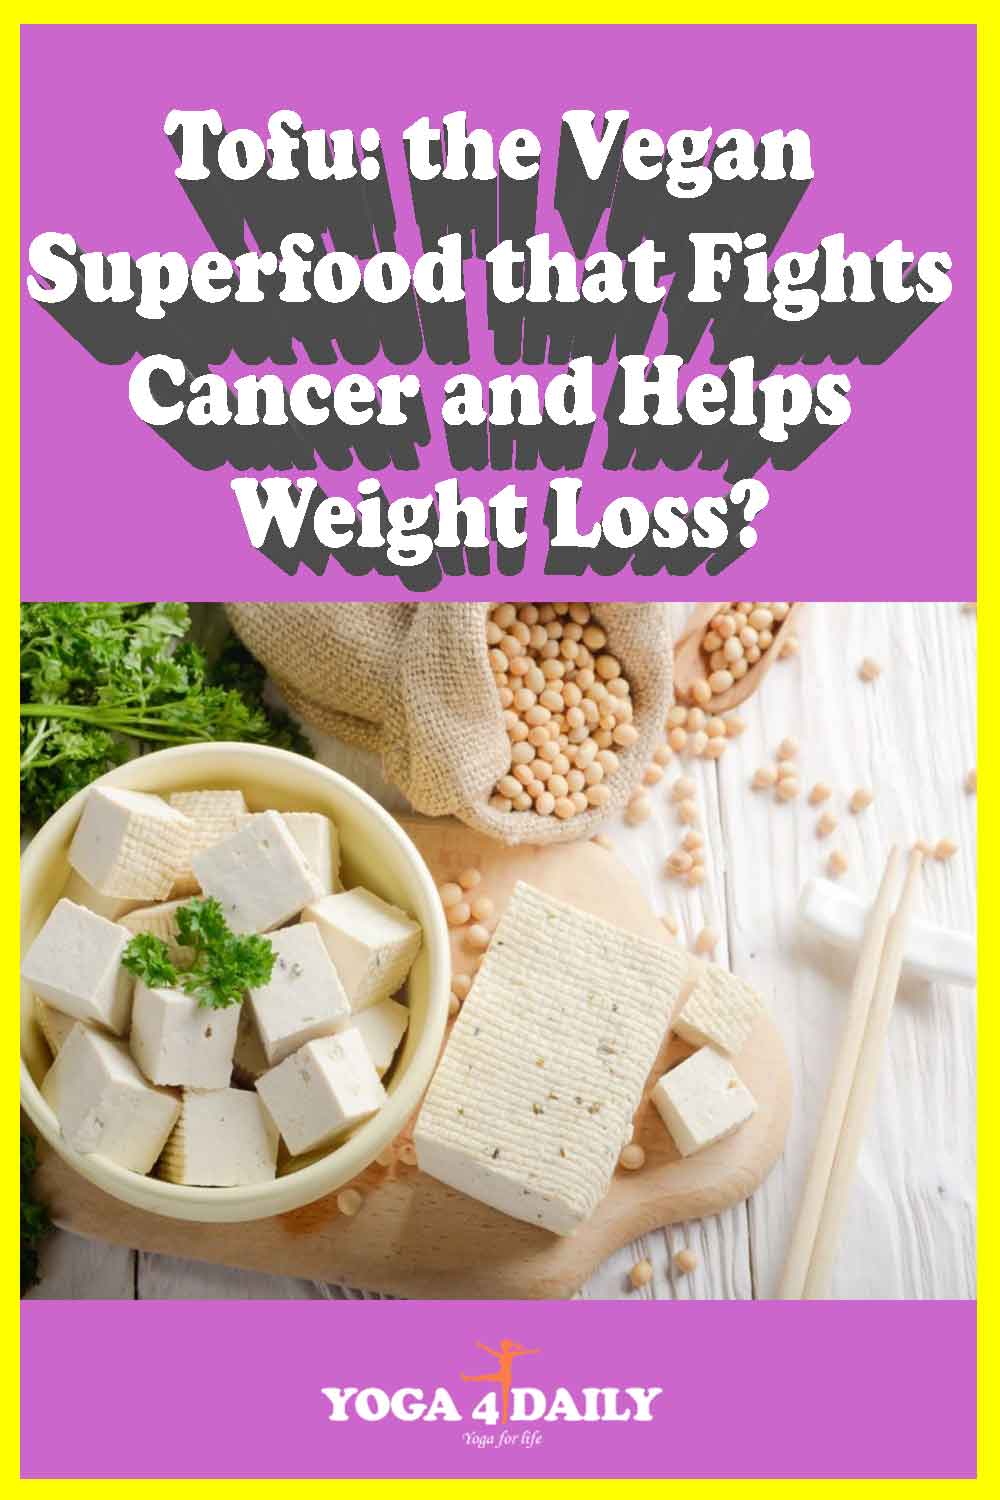 Tofu: the Vegan Superfood that Fights Cancer and Helps Weight Loss?